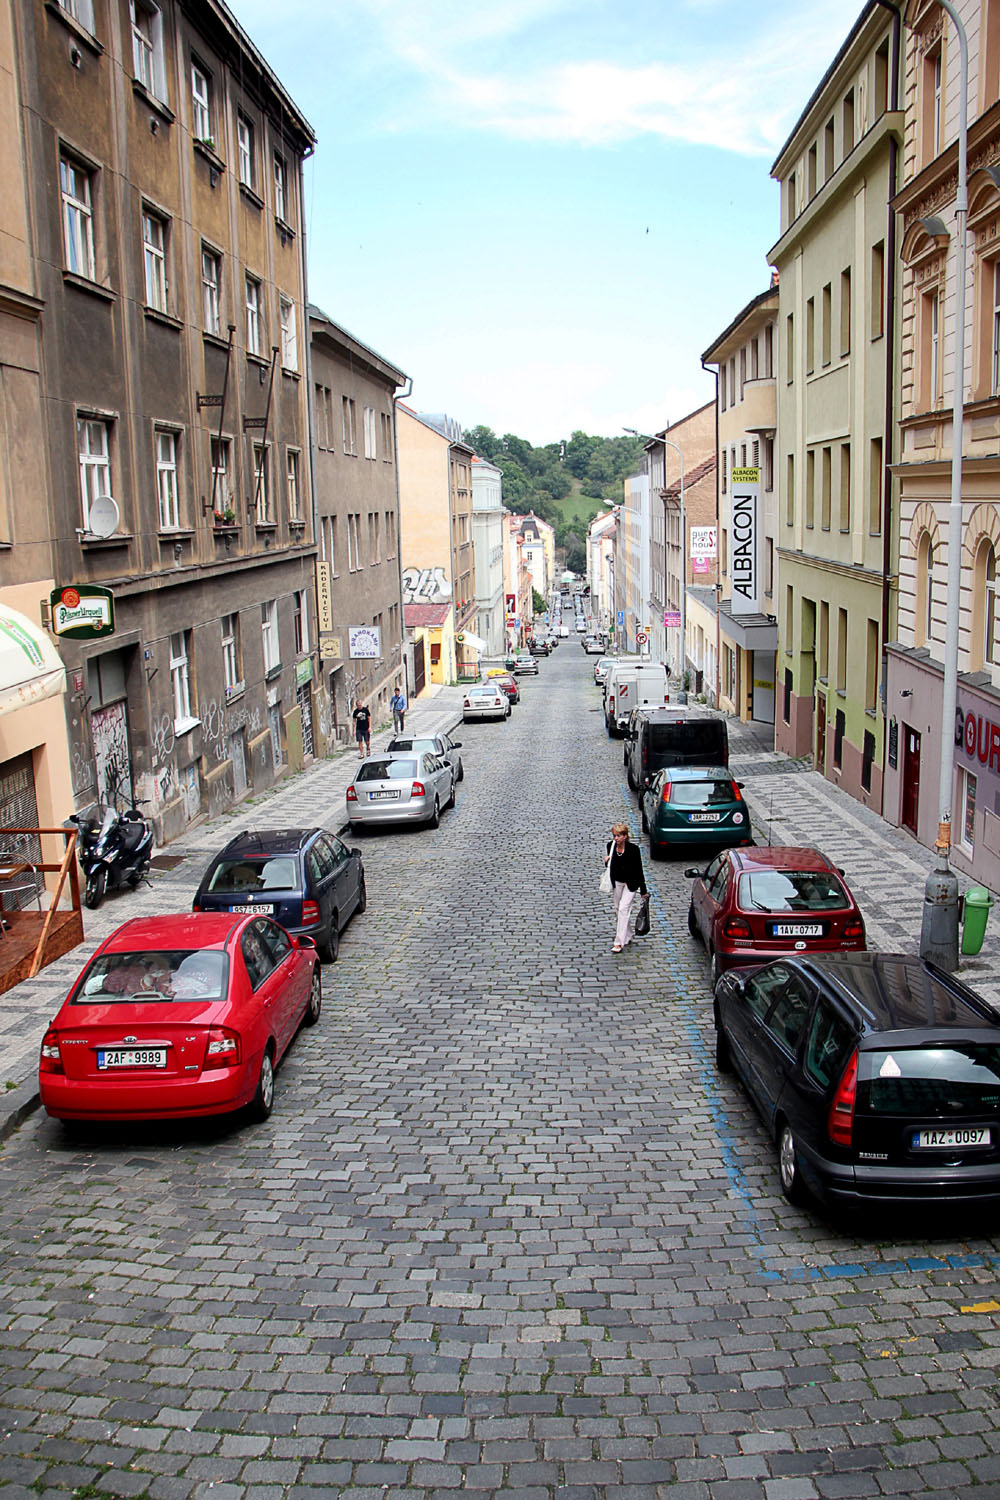 The other side of Prague